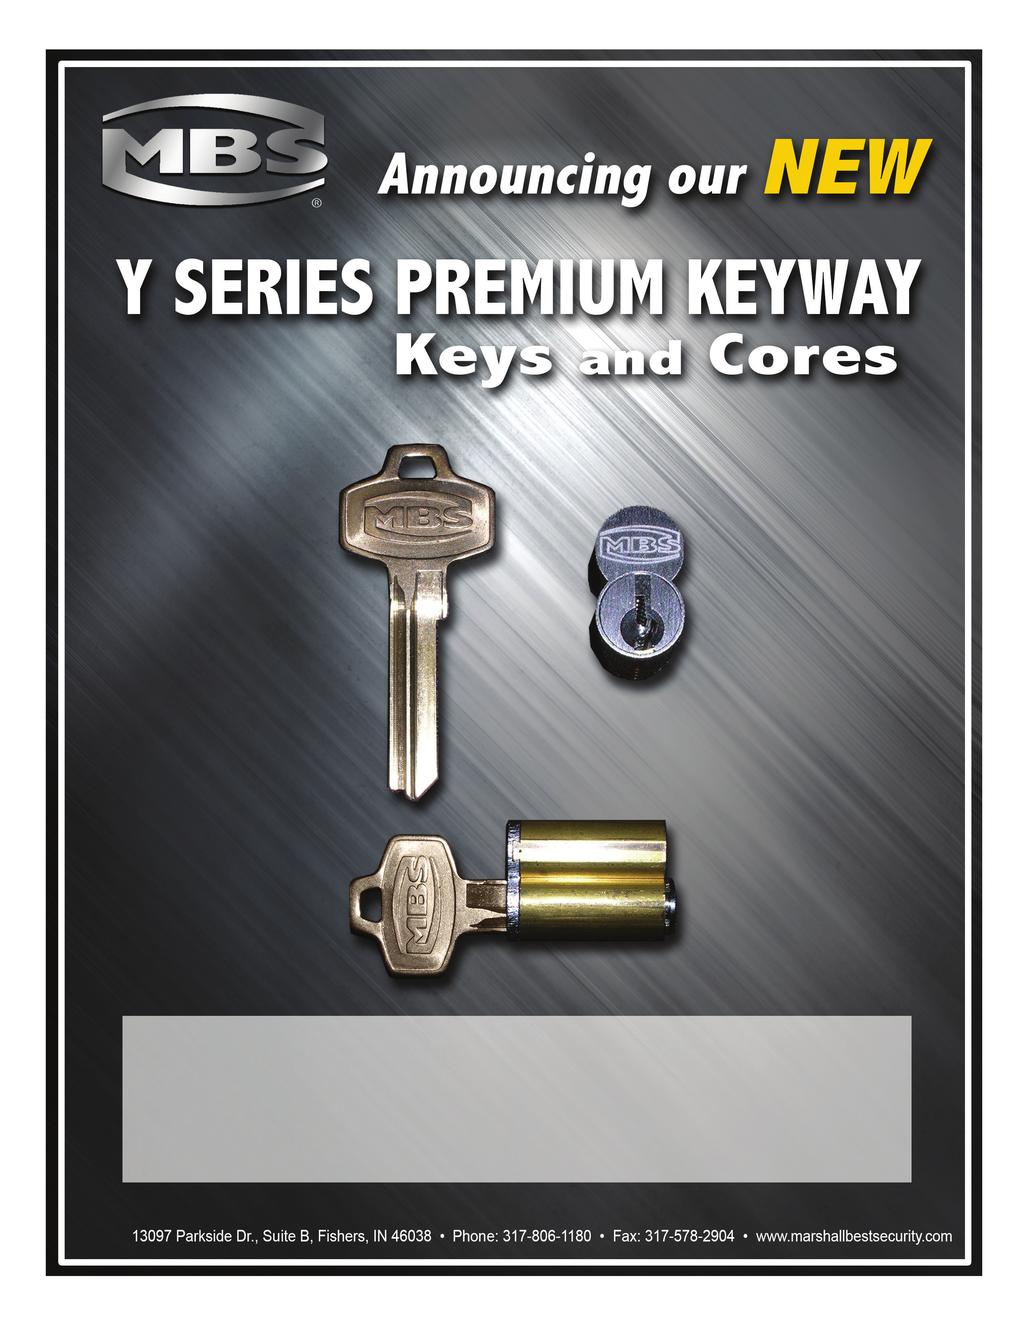 Marshall Best Security is pleased to announce our brand new Y series key designs, YA, YB, YC and YD keyways. Also available is the special pass-through YE keyway that operates in YA through YD cores.